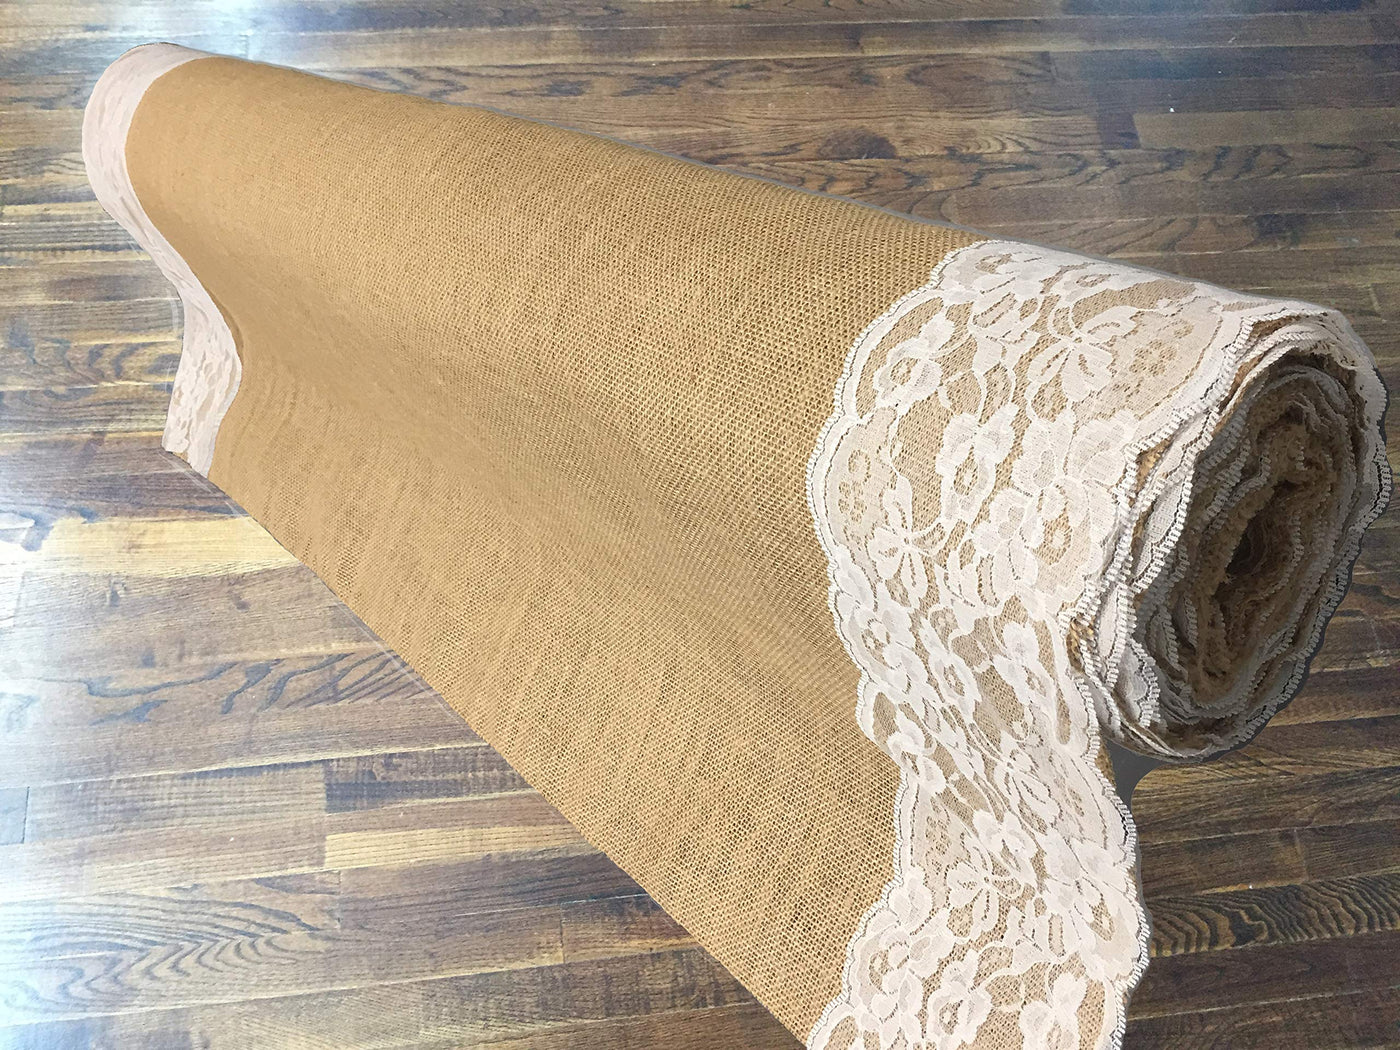 AAYU Burlap Wedding Aisle Runner with White Lace 40 Inch x 75 Feet Natural Jute Carpet Runner for Wedding and Party Decor